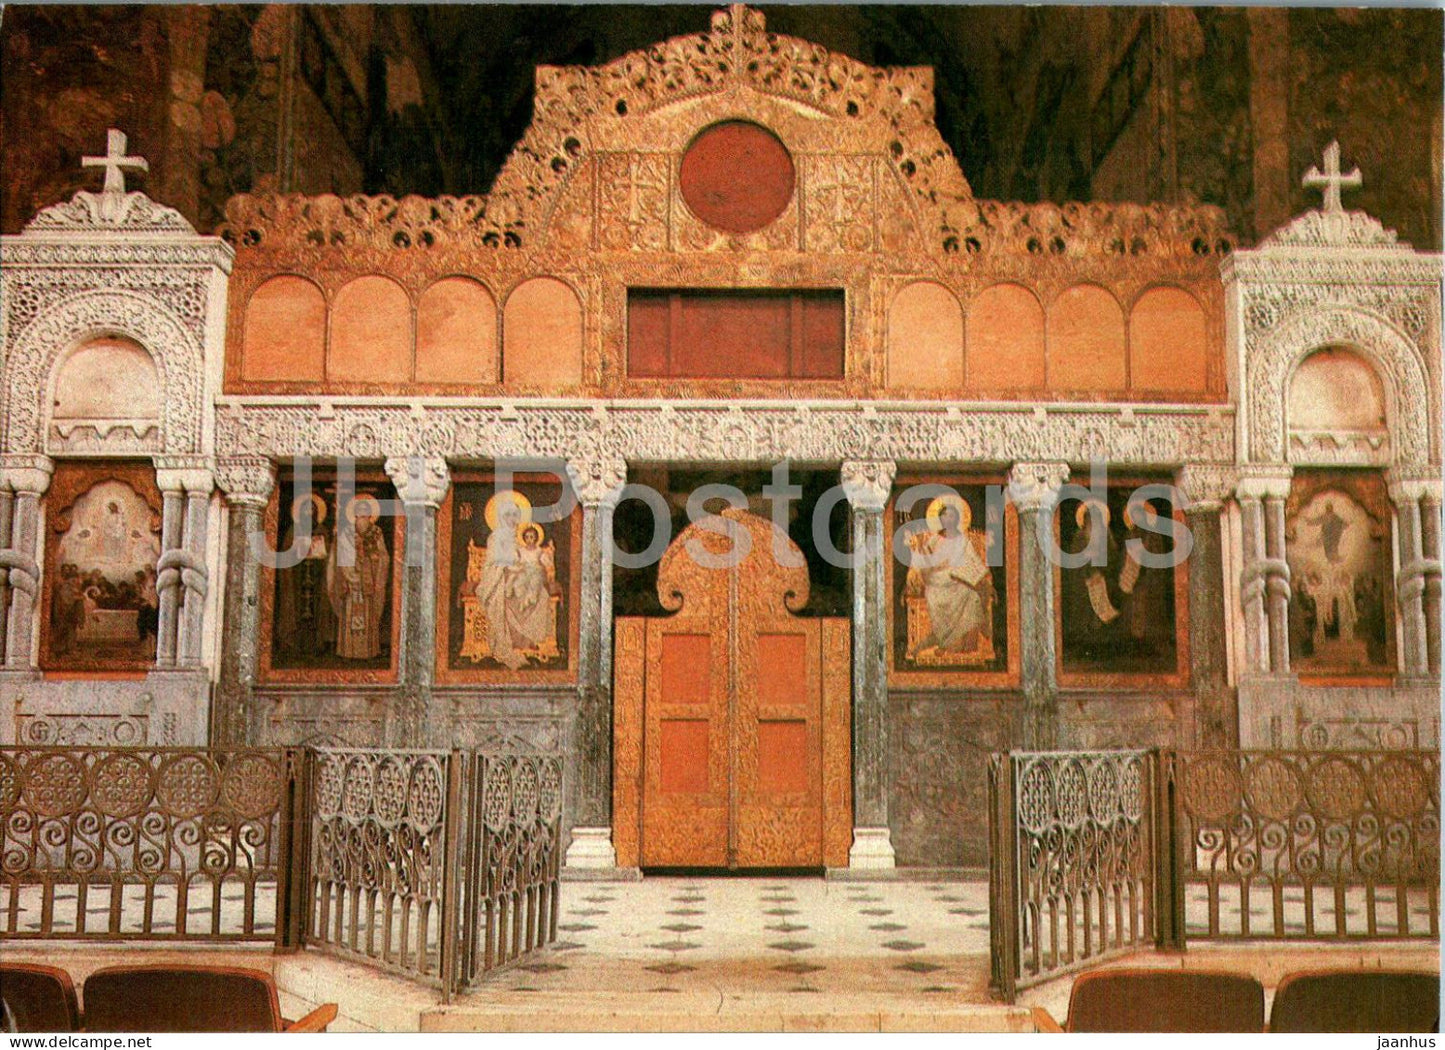 Kyiv Pechersk Lavra - A refectory chamber with a church - iconostasis - 1990 - Ukraine USSR - unused - JH Postcards